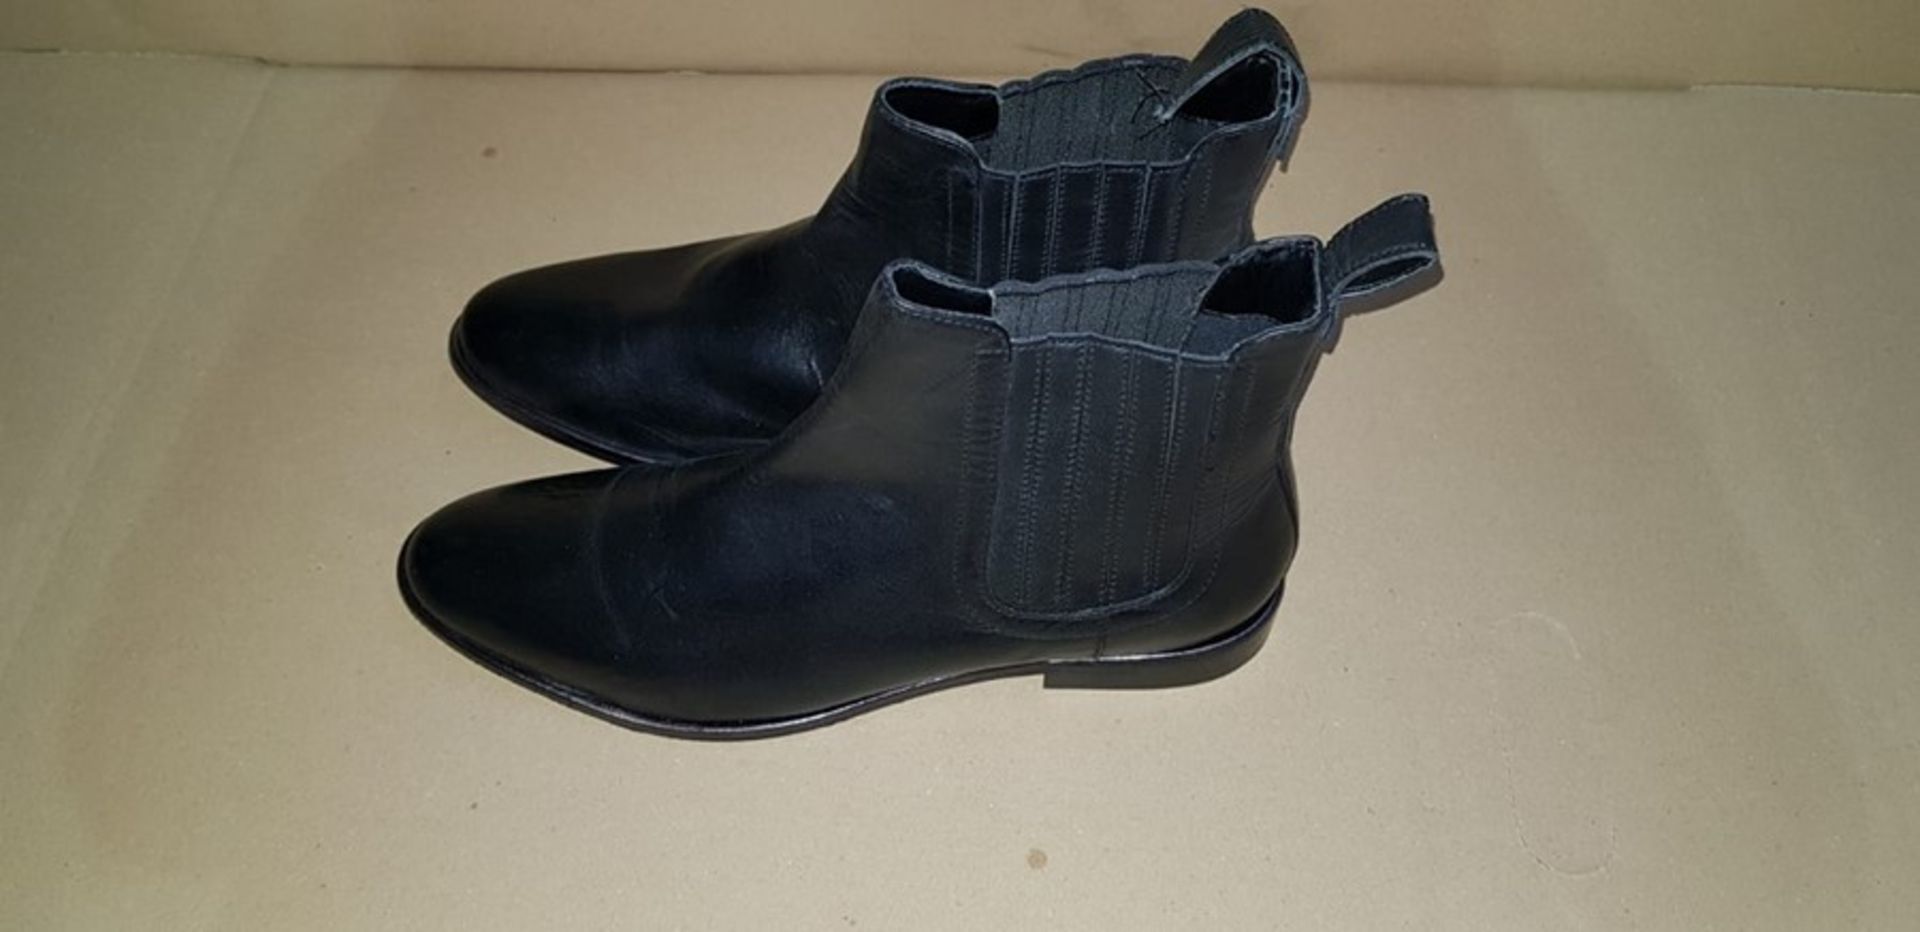 1 PAIR OF AS NEW LA REDOUTE BOOTS, WOMENS SIZE 8 IN BLACK *NO BOX* RRP £30.00 (VIEWING HIGHLY